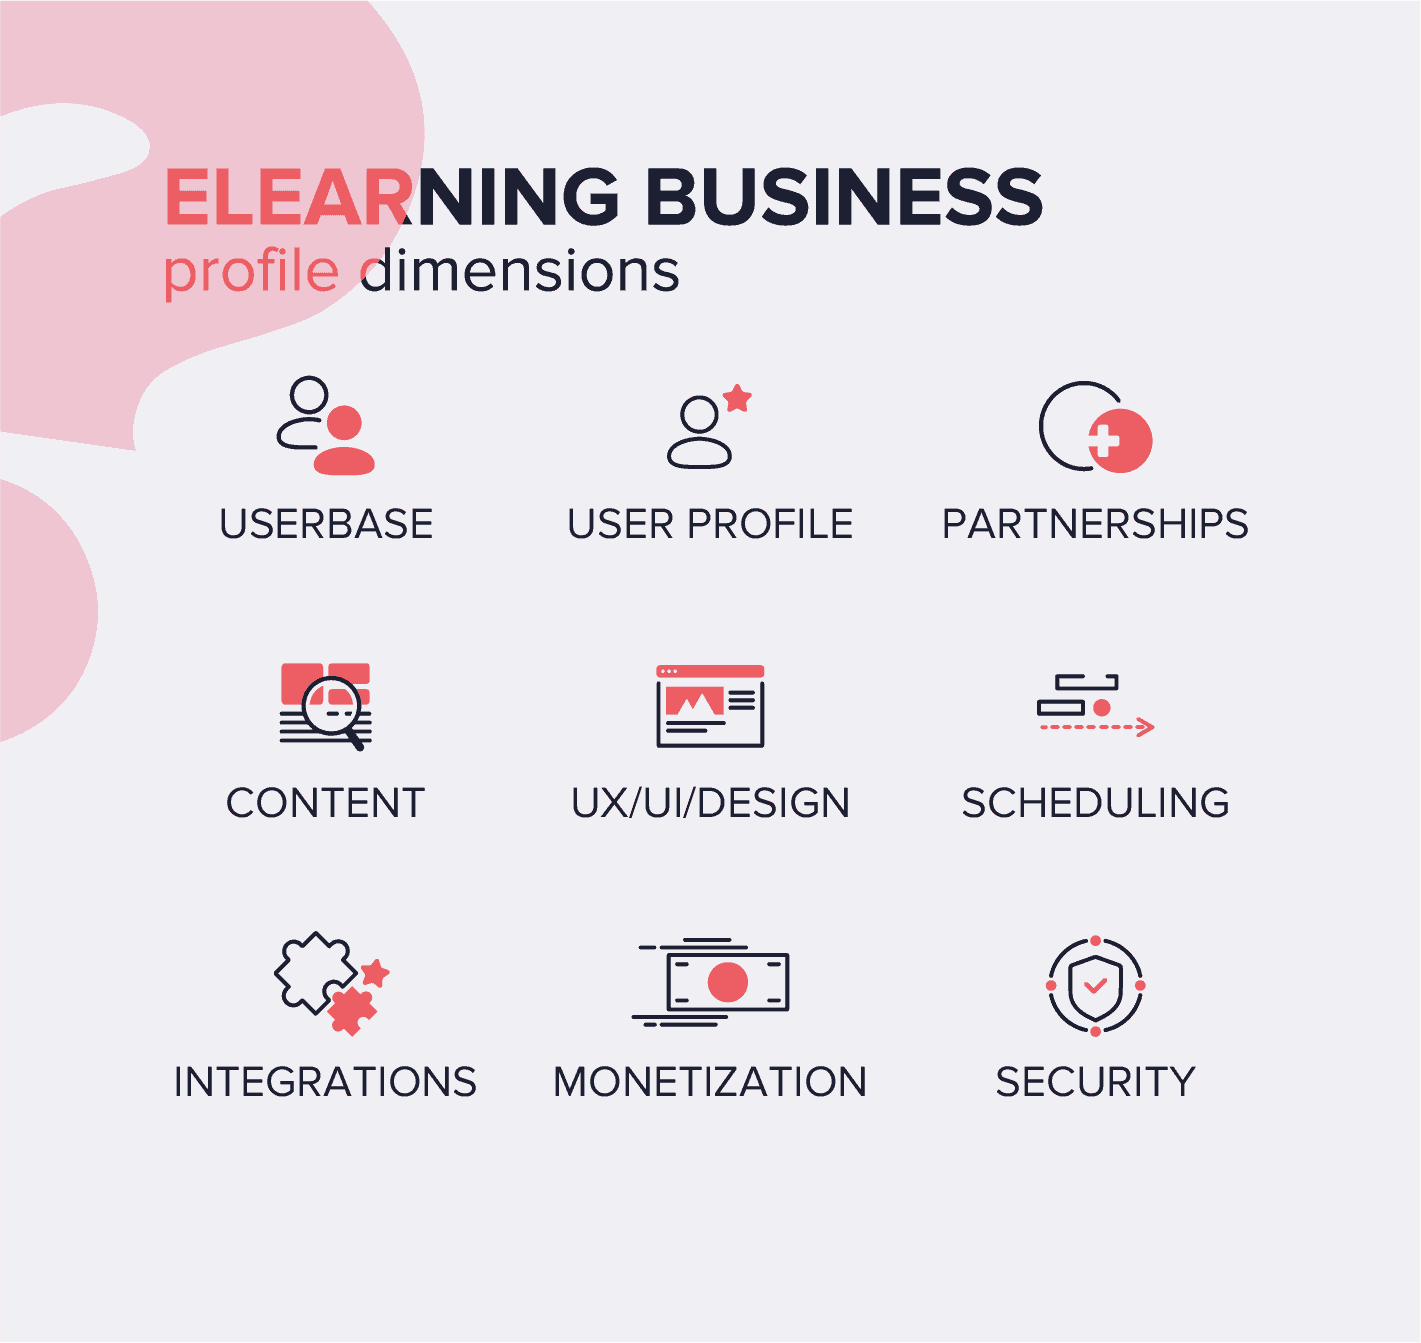 eLearning business profile dimensions